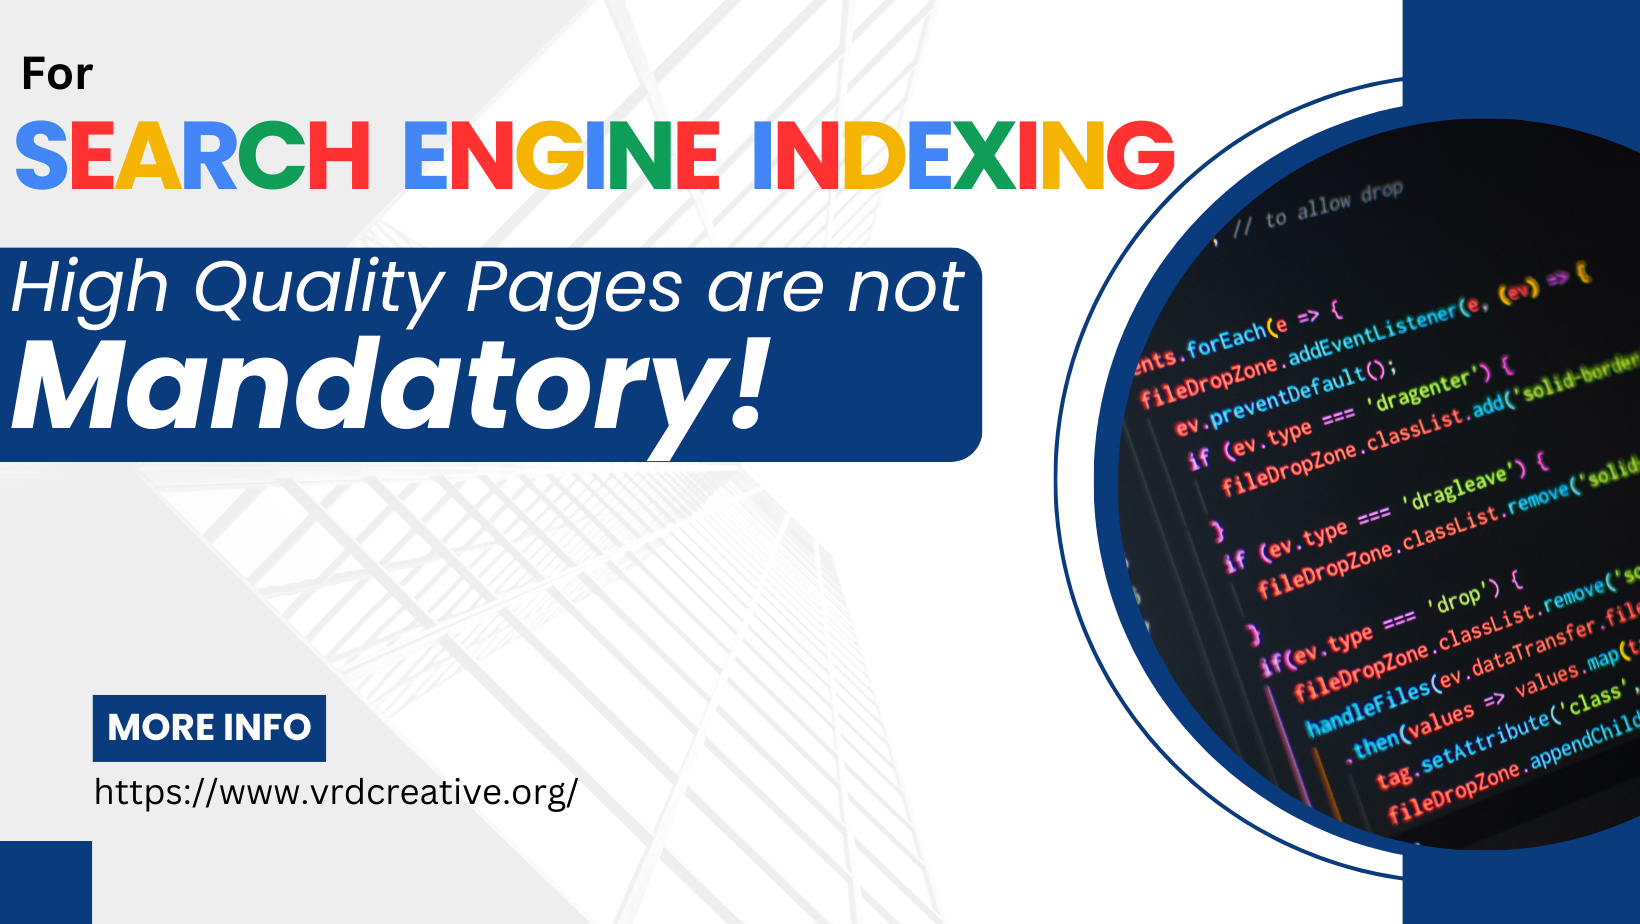 High Quality Pages are not Mandatory for Search Engine Indexing